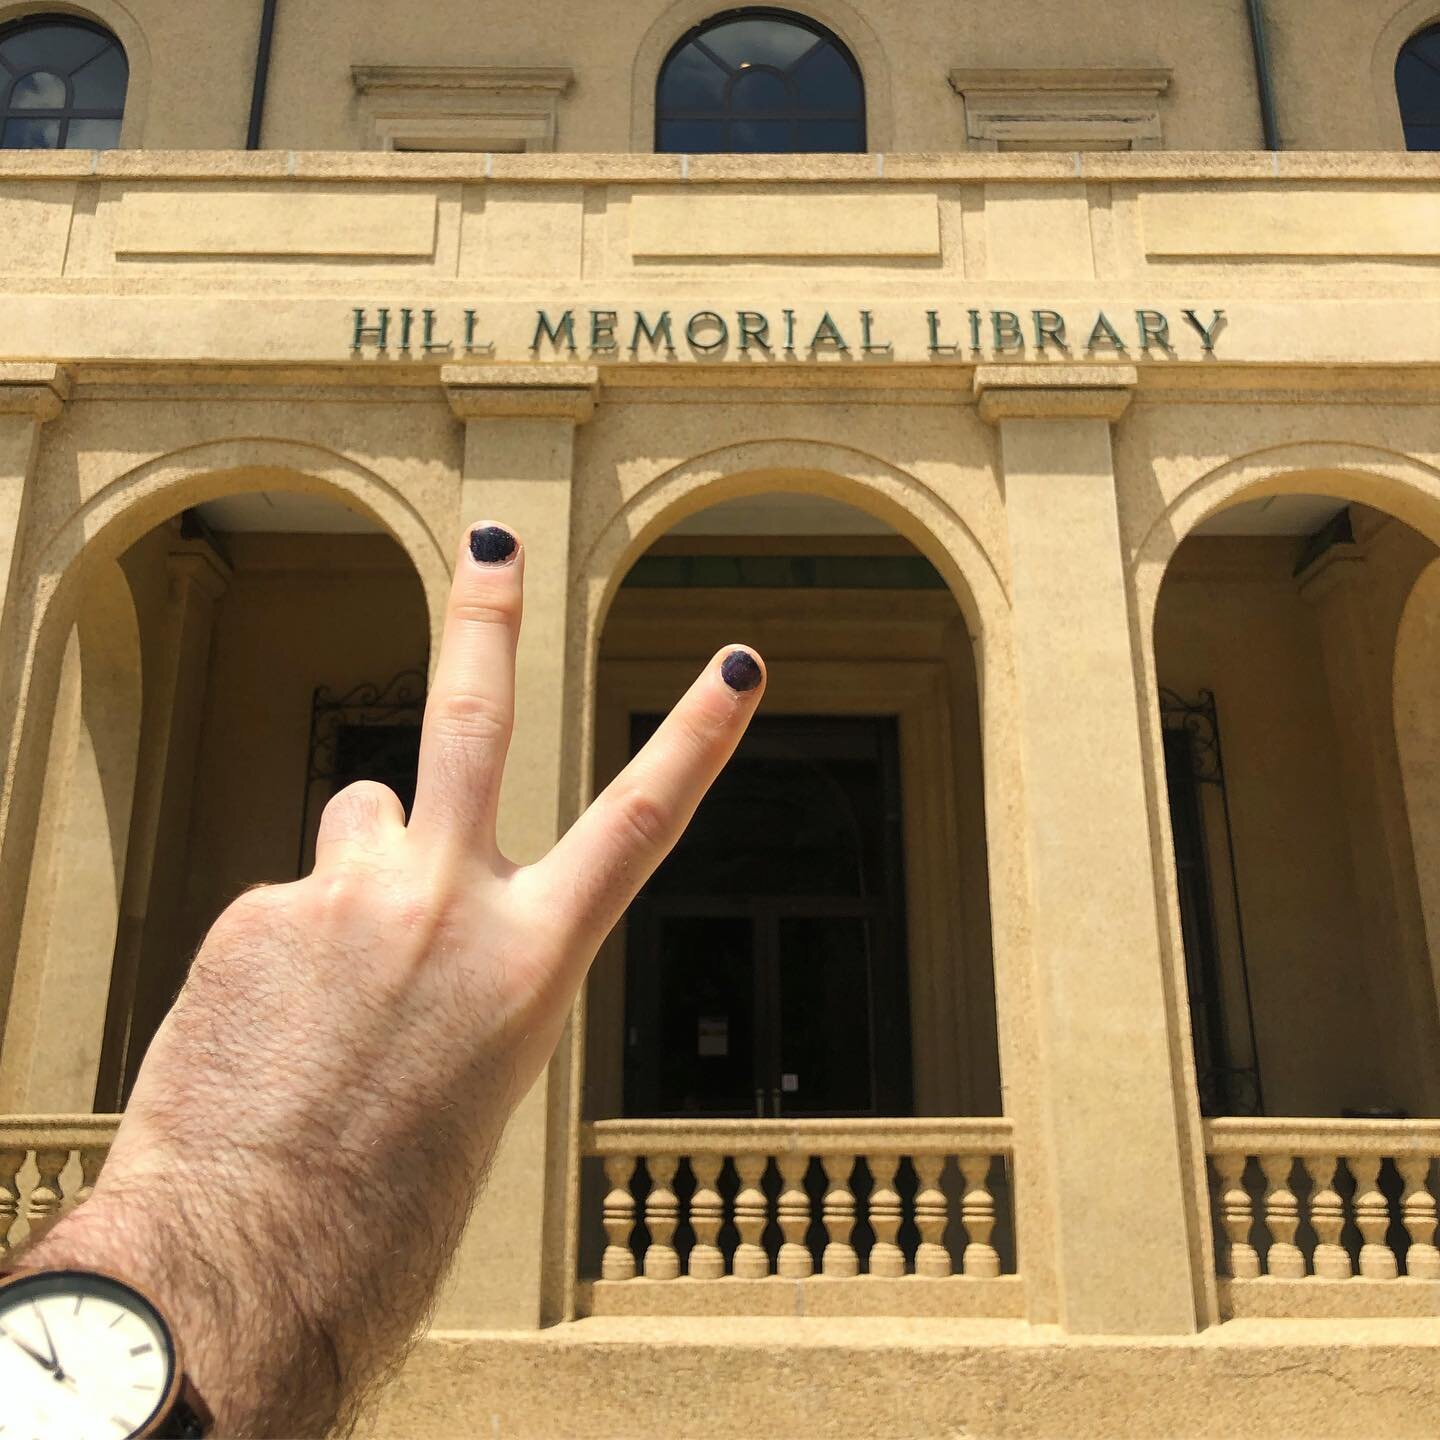 A special shoutout goes to the LSU Hill Memorial Library for purchasing copies of LEUR to keep in their archives. Thank you for supporting and preserving local queer art. #louisiana #lsu #queerart #leur #leurmag #louisianalgbtqia #southernqueer #sout